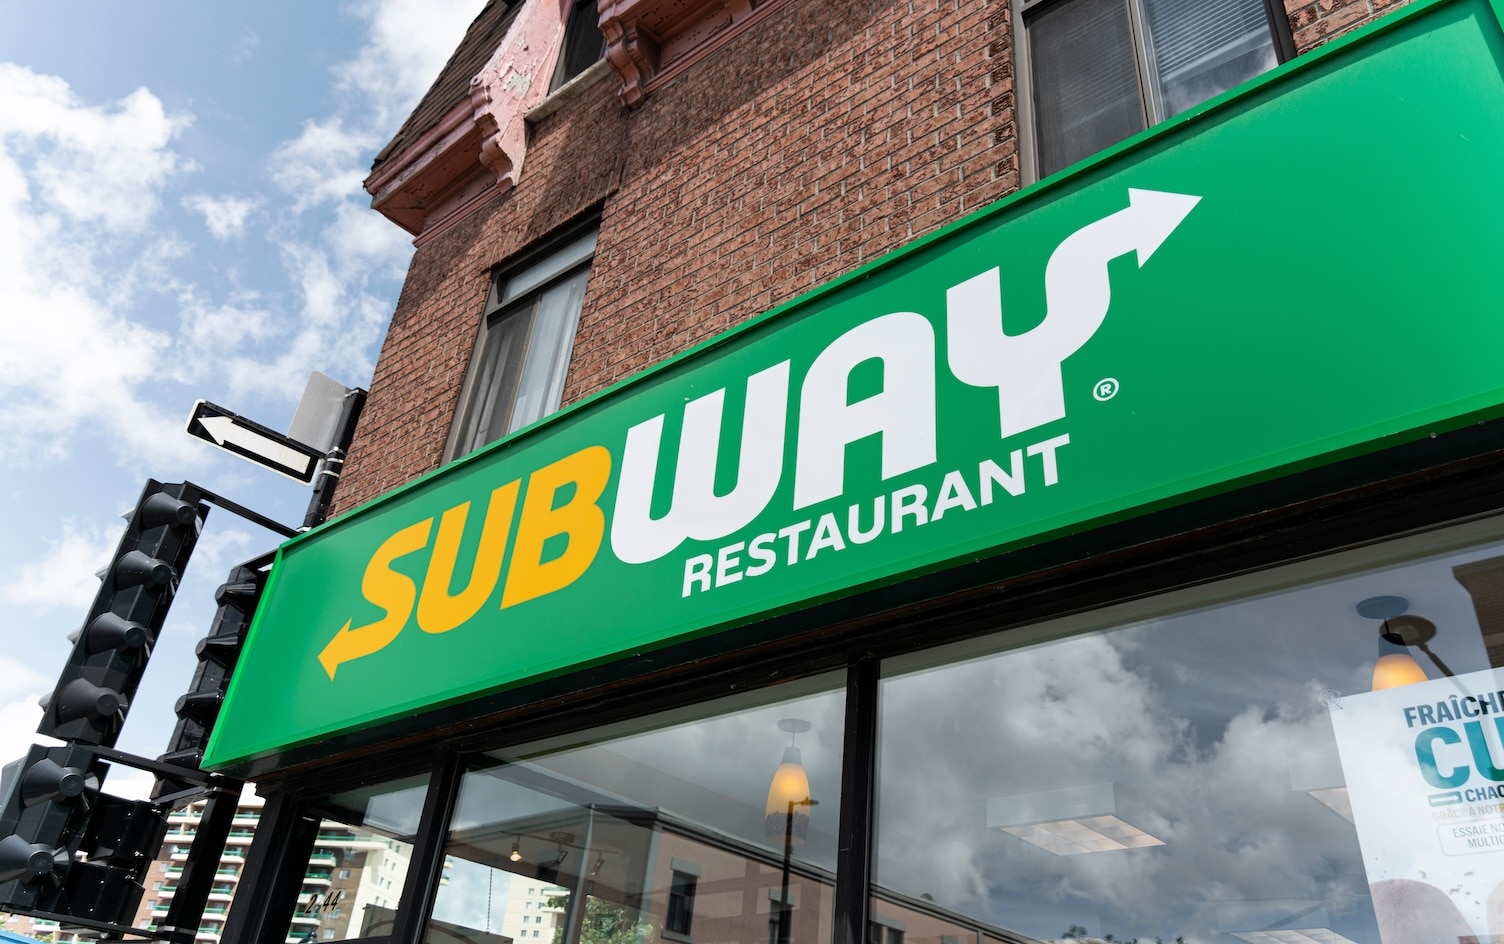 7 Subway Healthy Options According to a Dietitian